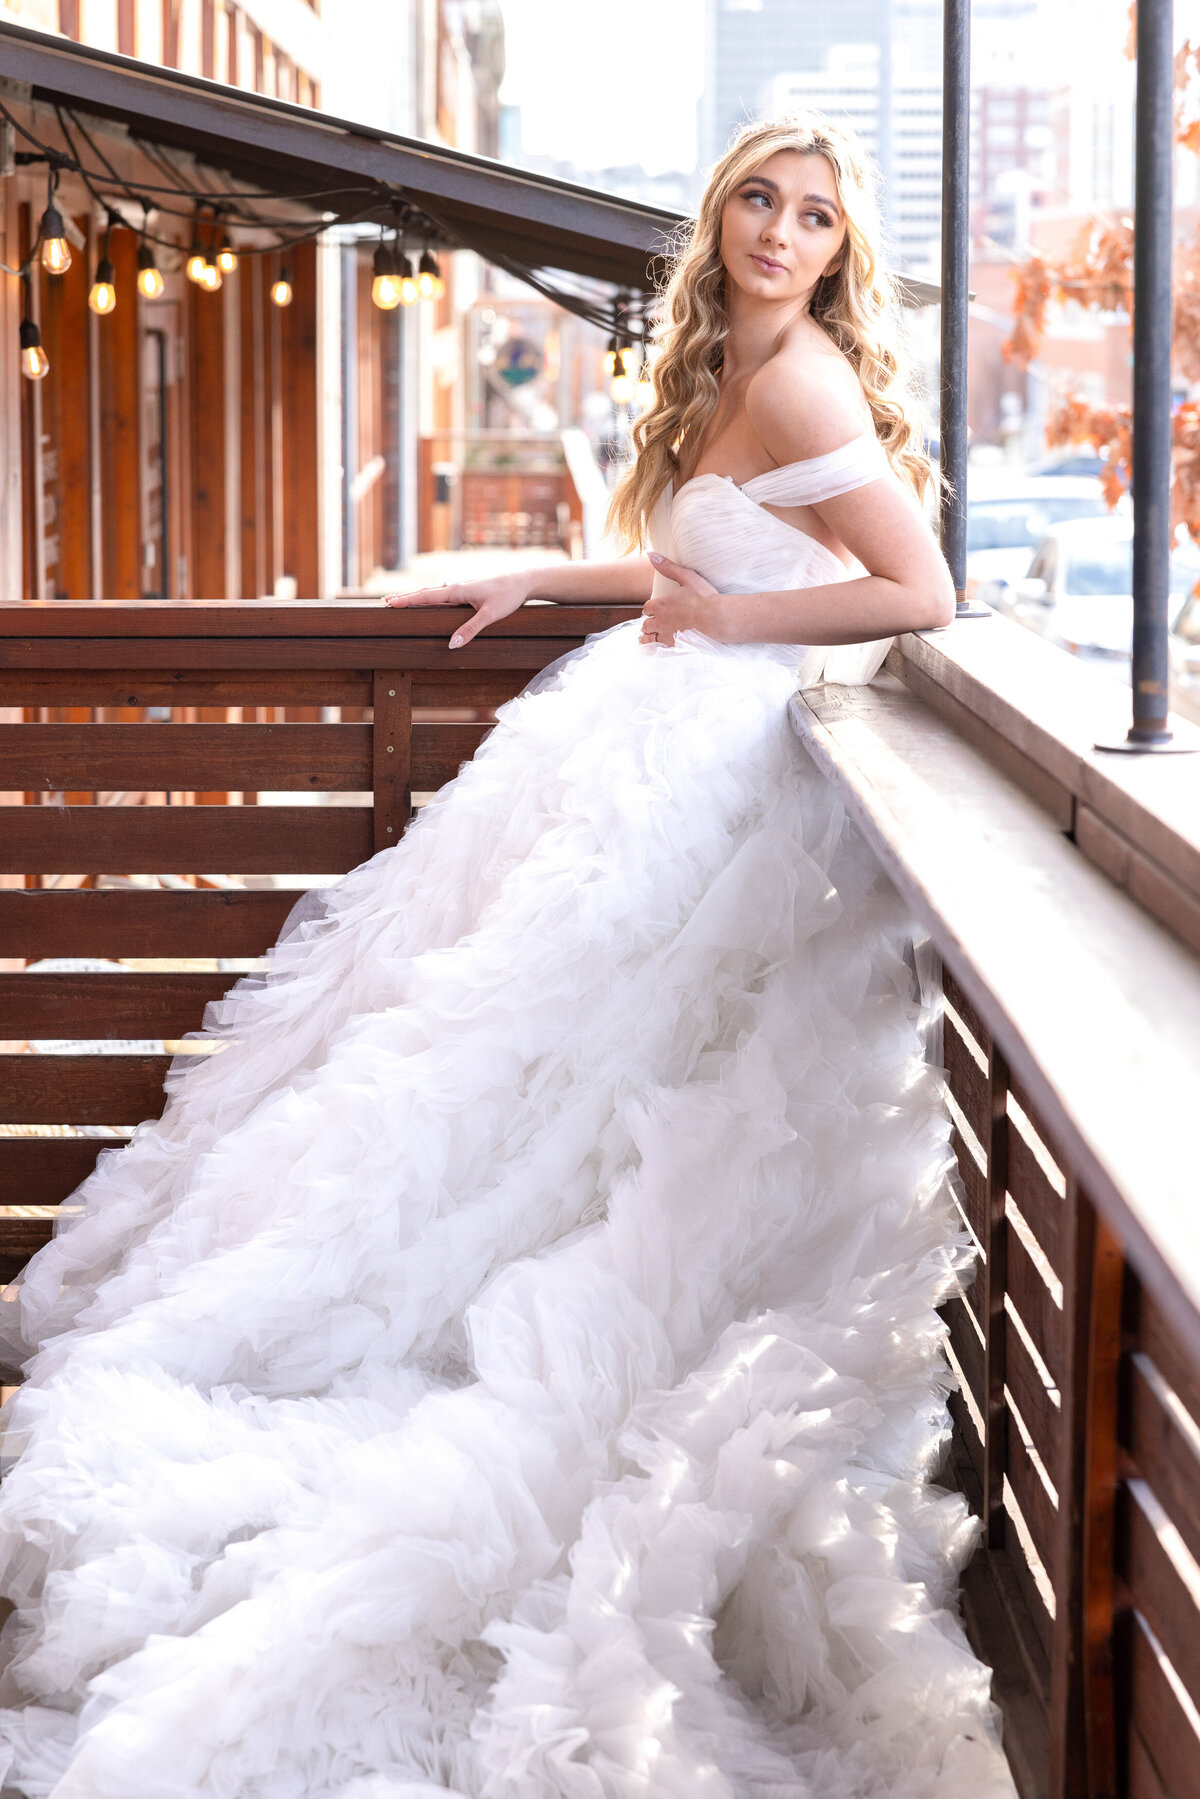 bride leaning on railing looking out at street with backlighting